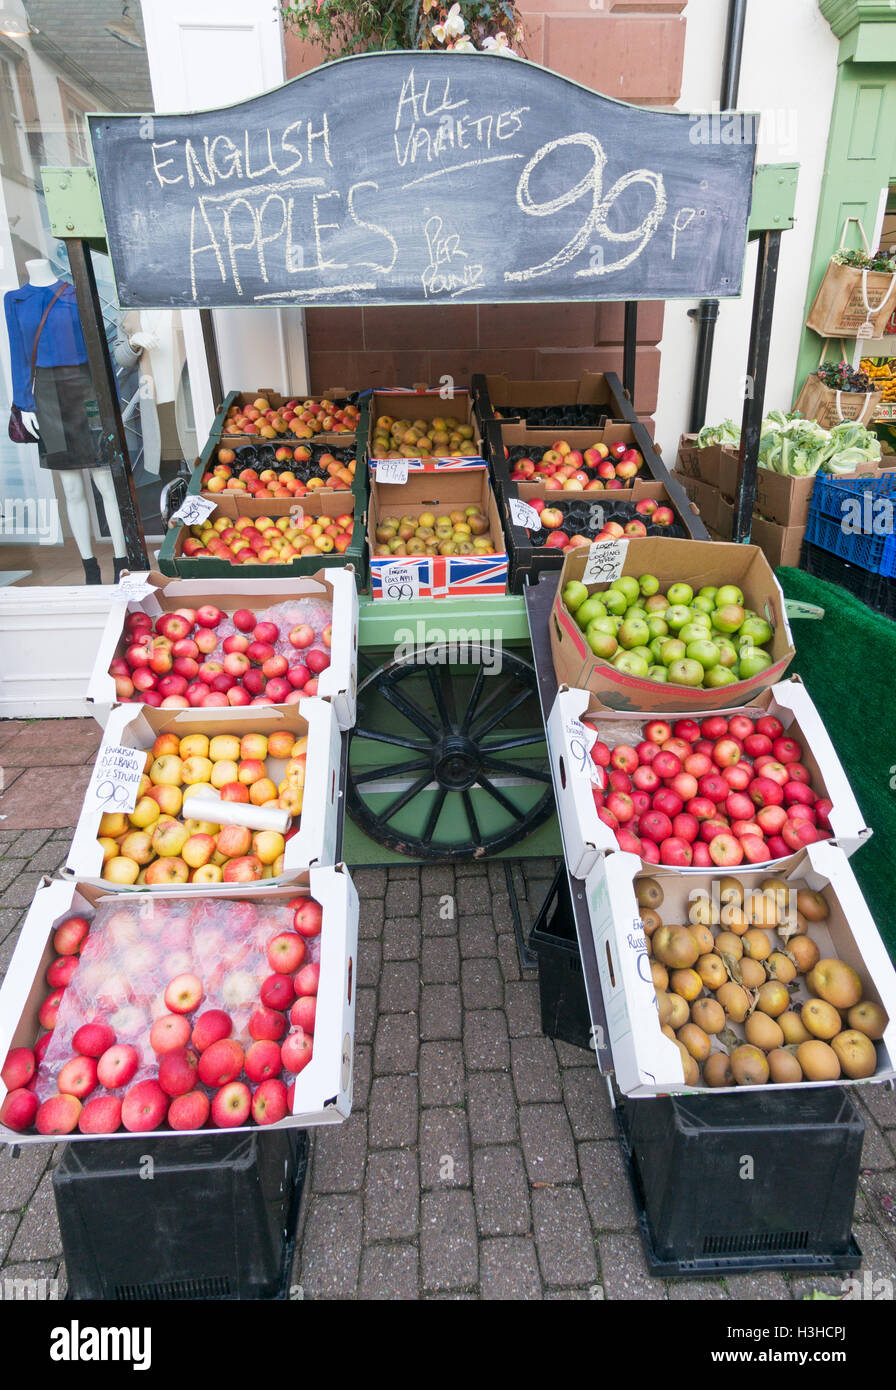 Display of English apples outside a fruit shop in Penrith, Cumbria, England, UK Stock Photo